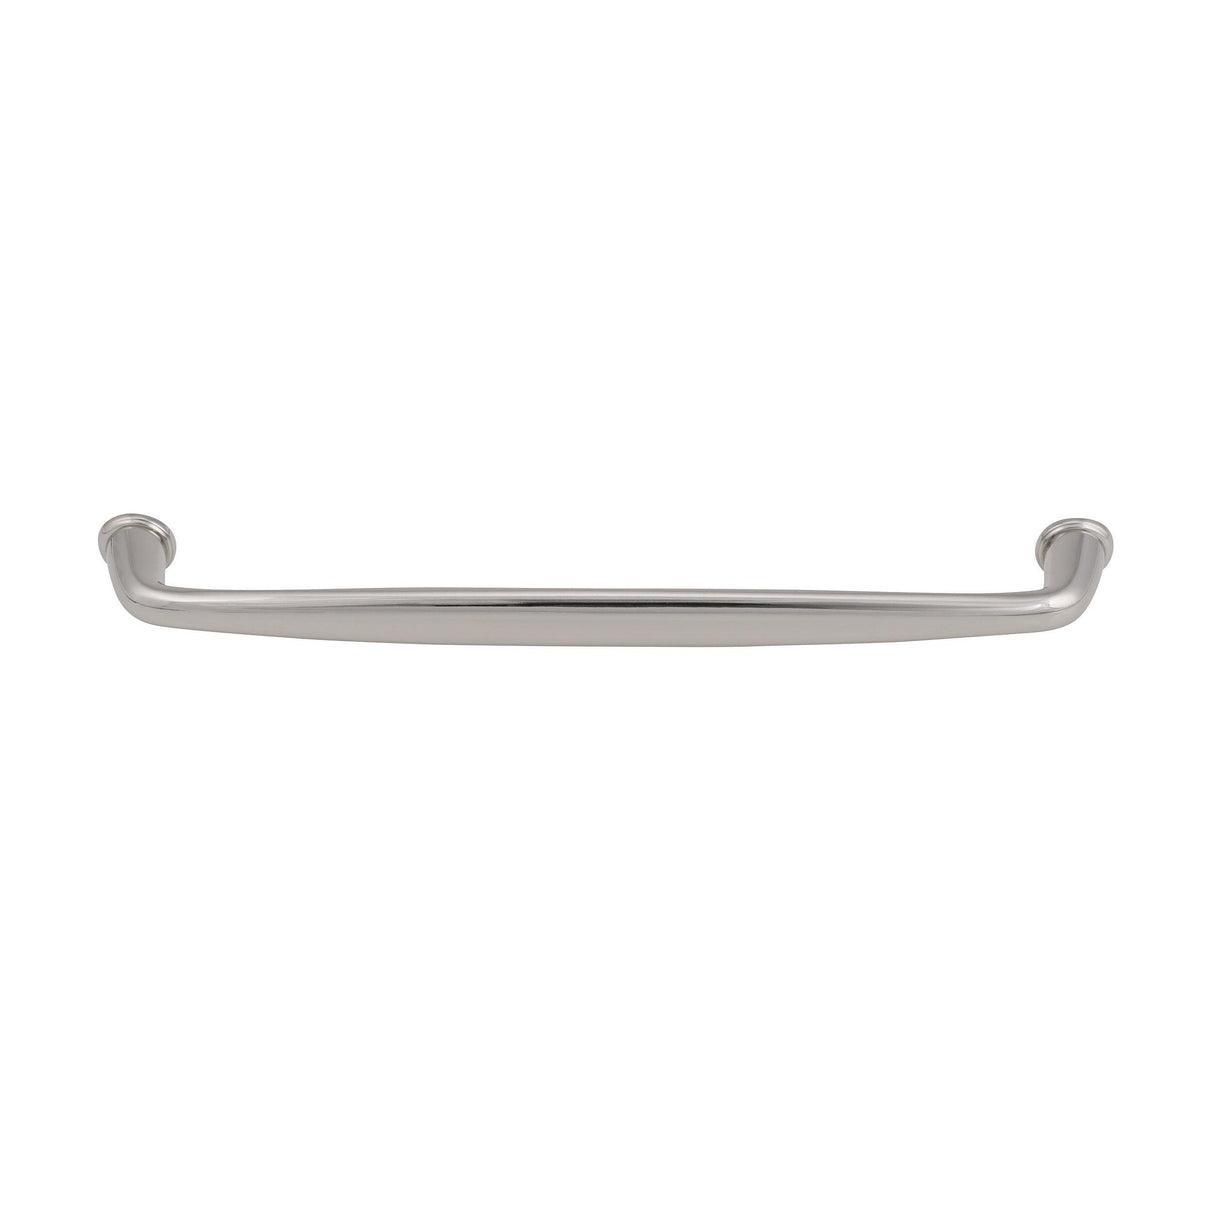 Amerock Appliance Pull Polished Nickel 12 inch (305 mm) Center to Center Kane 1 Pack Drawer Pull Drawer Handle Cabinet Hardware